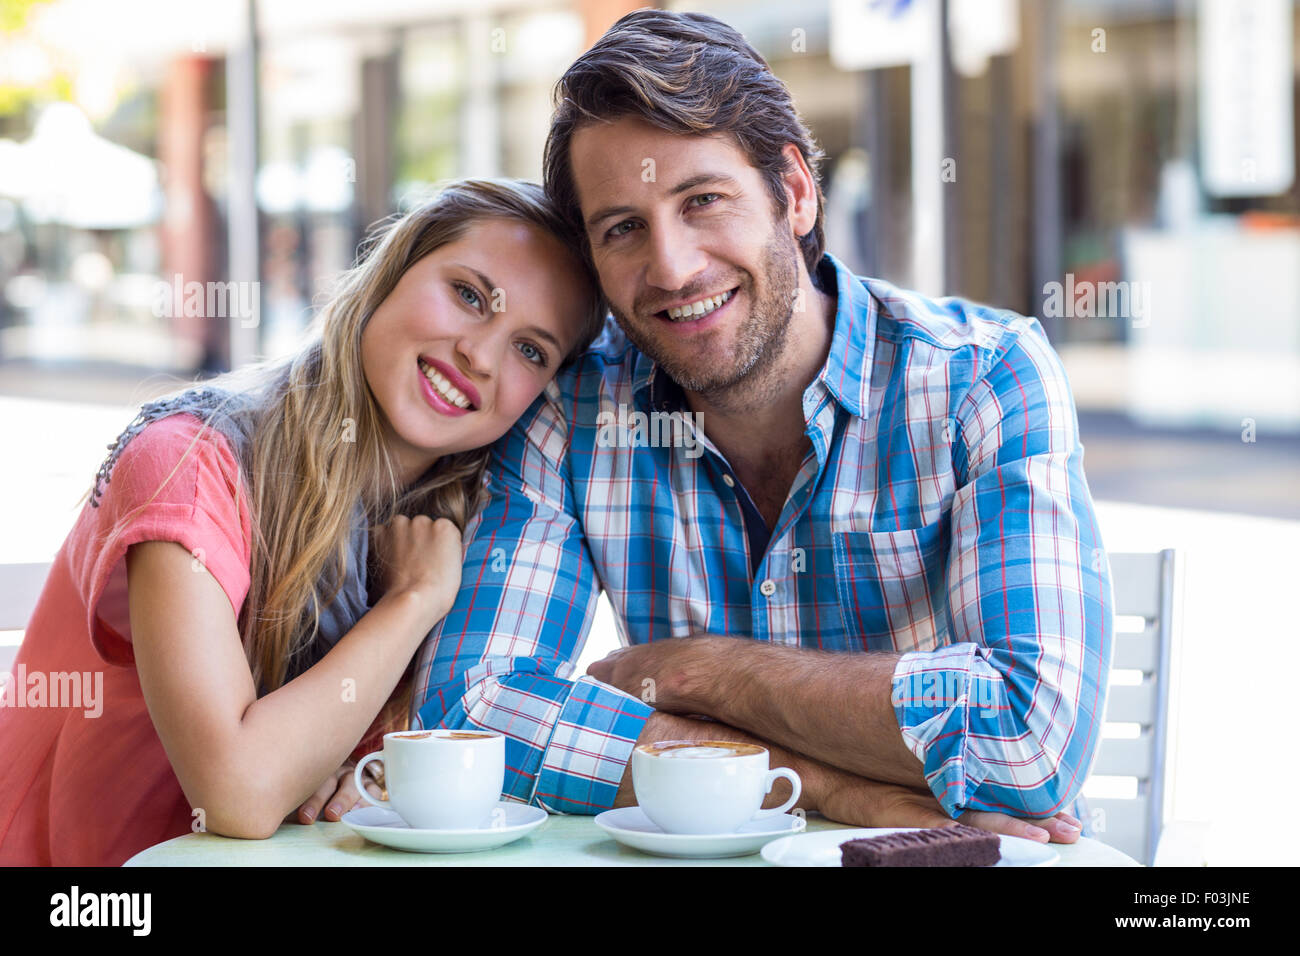 Smiling couple having tea in a cafe Stock Photo